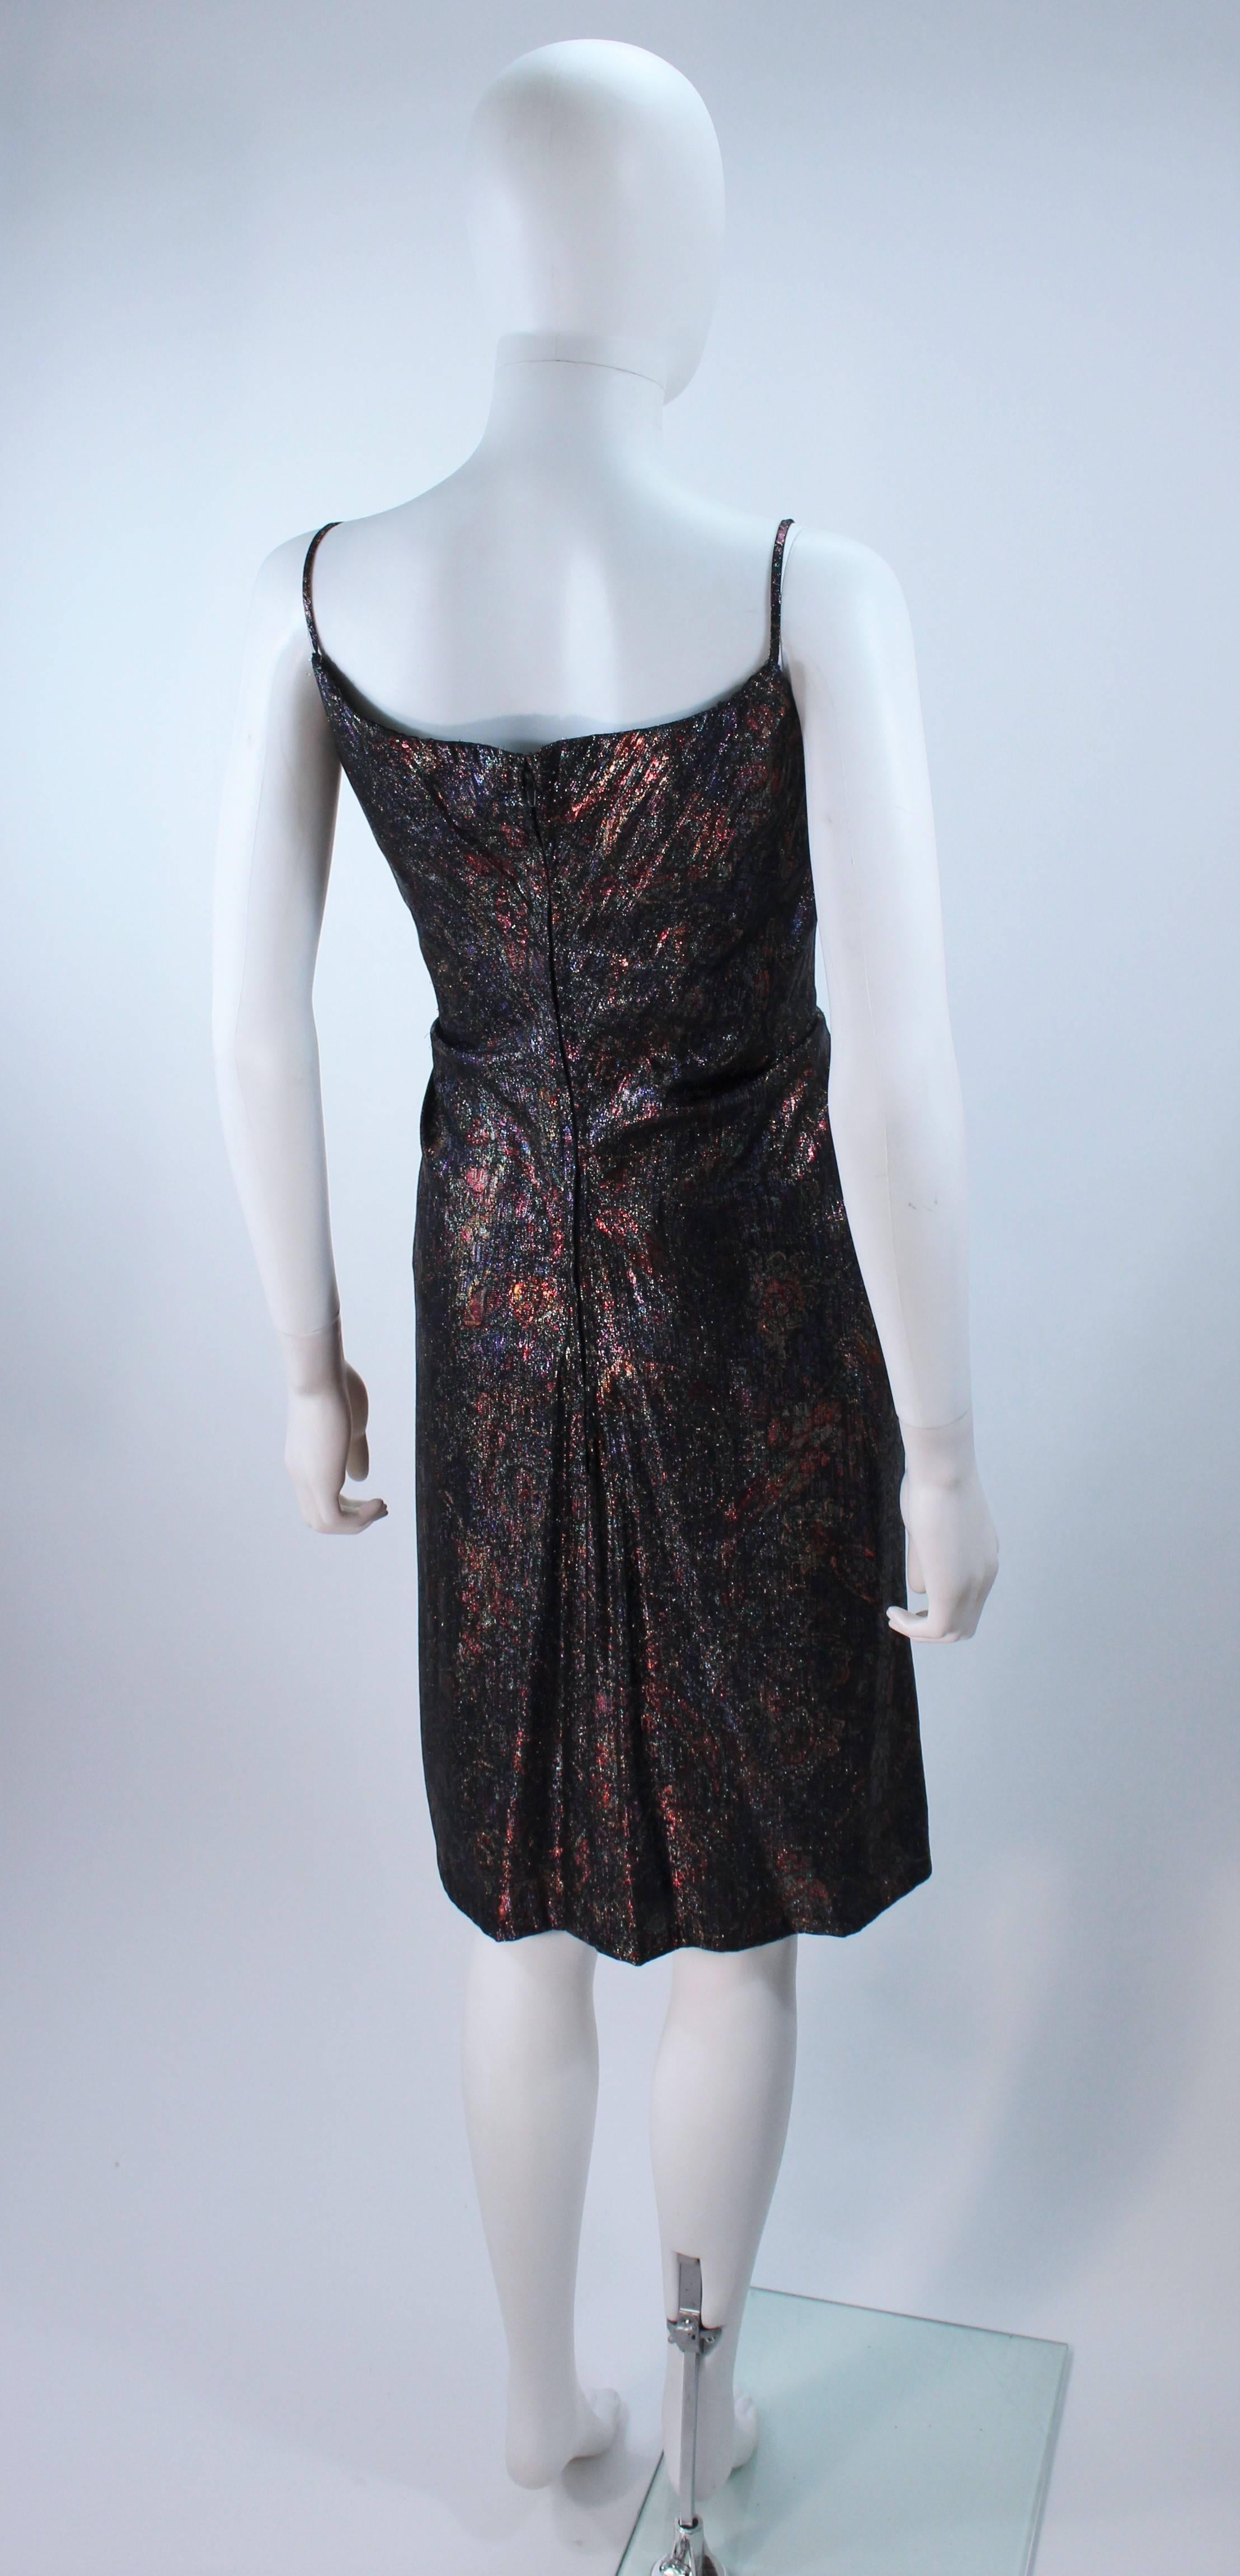 NOLAN MILLER Metallic Paisley Print Cocktail Dress Size 4 In Excellent Condition For Sale In Los Angeles, CA